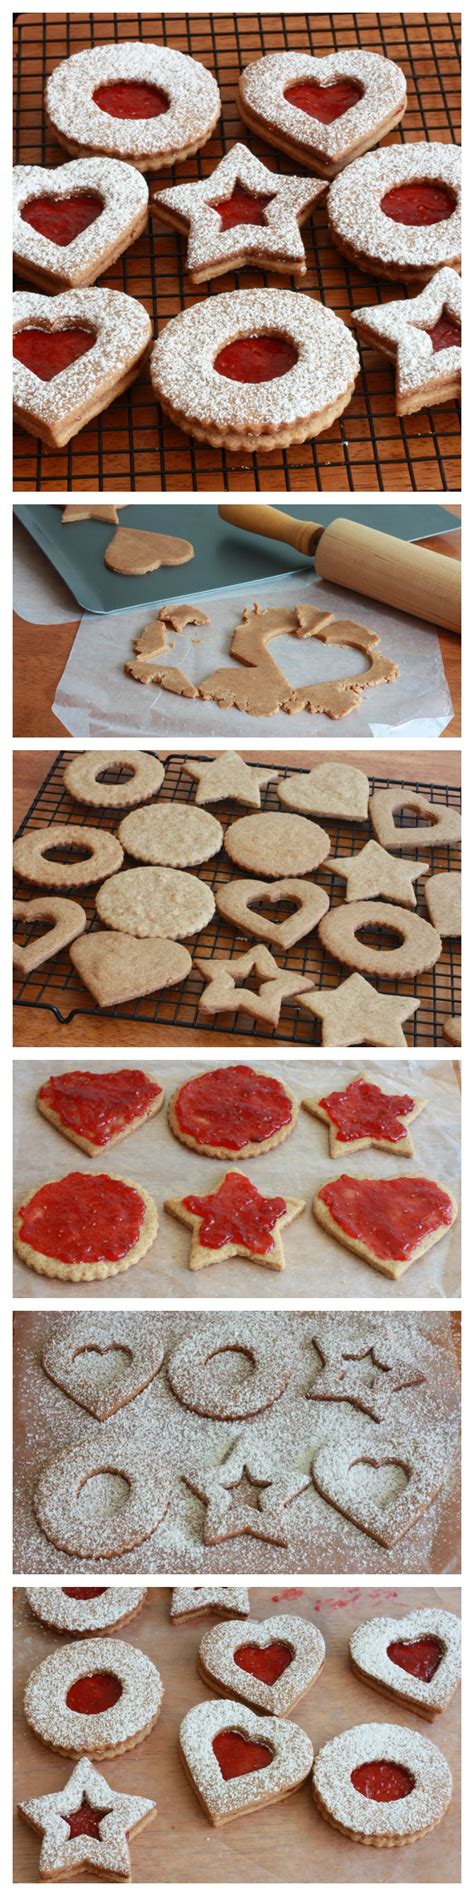 These peanut butter and jelly cookies are the most delicious peanut butter cookie topped with strawberry jam and a vanilla glaze. Linzer Cookies (Linzerkekse) | Recipe | Linzer cookies ...